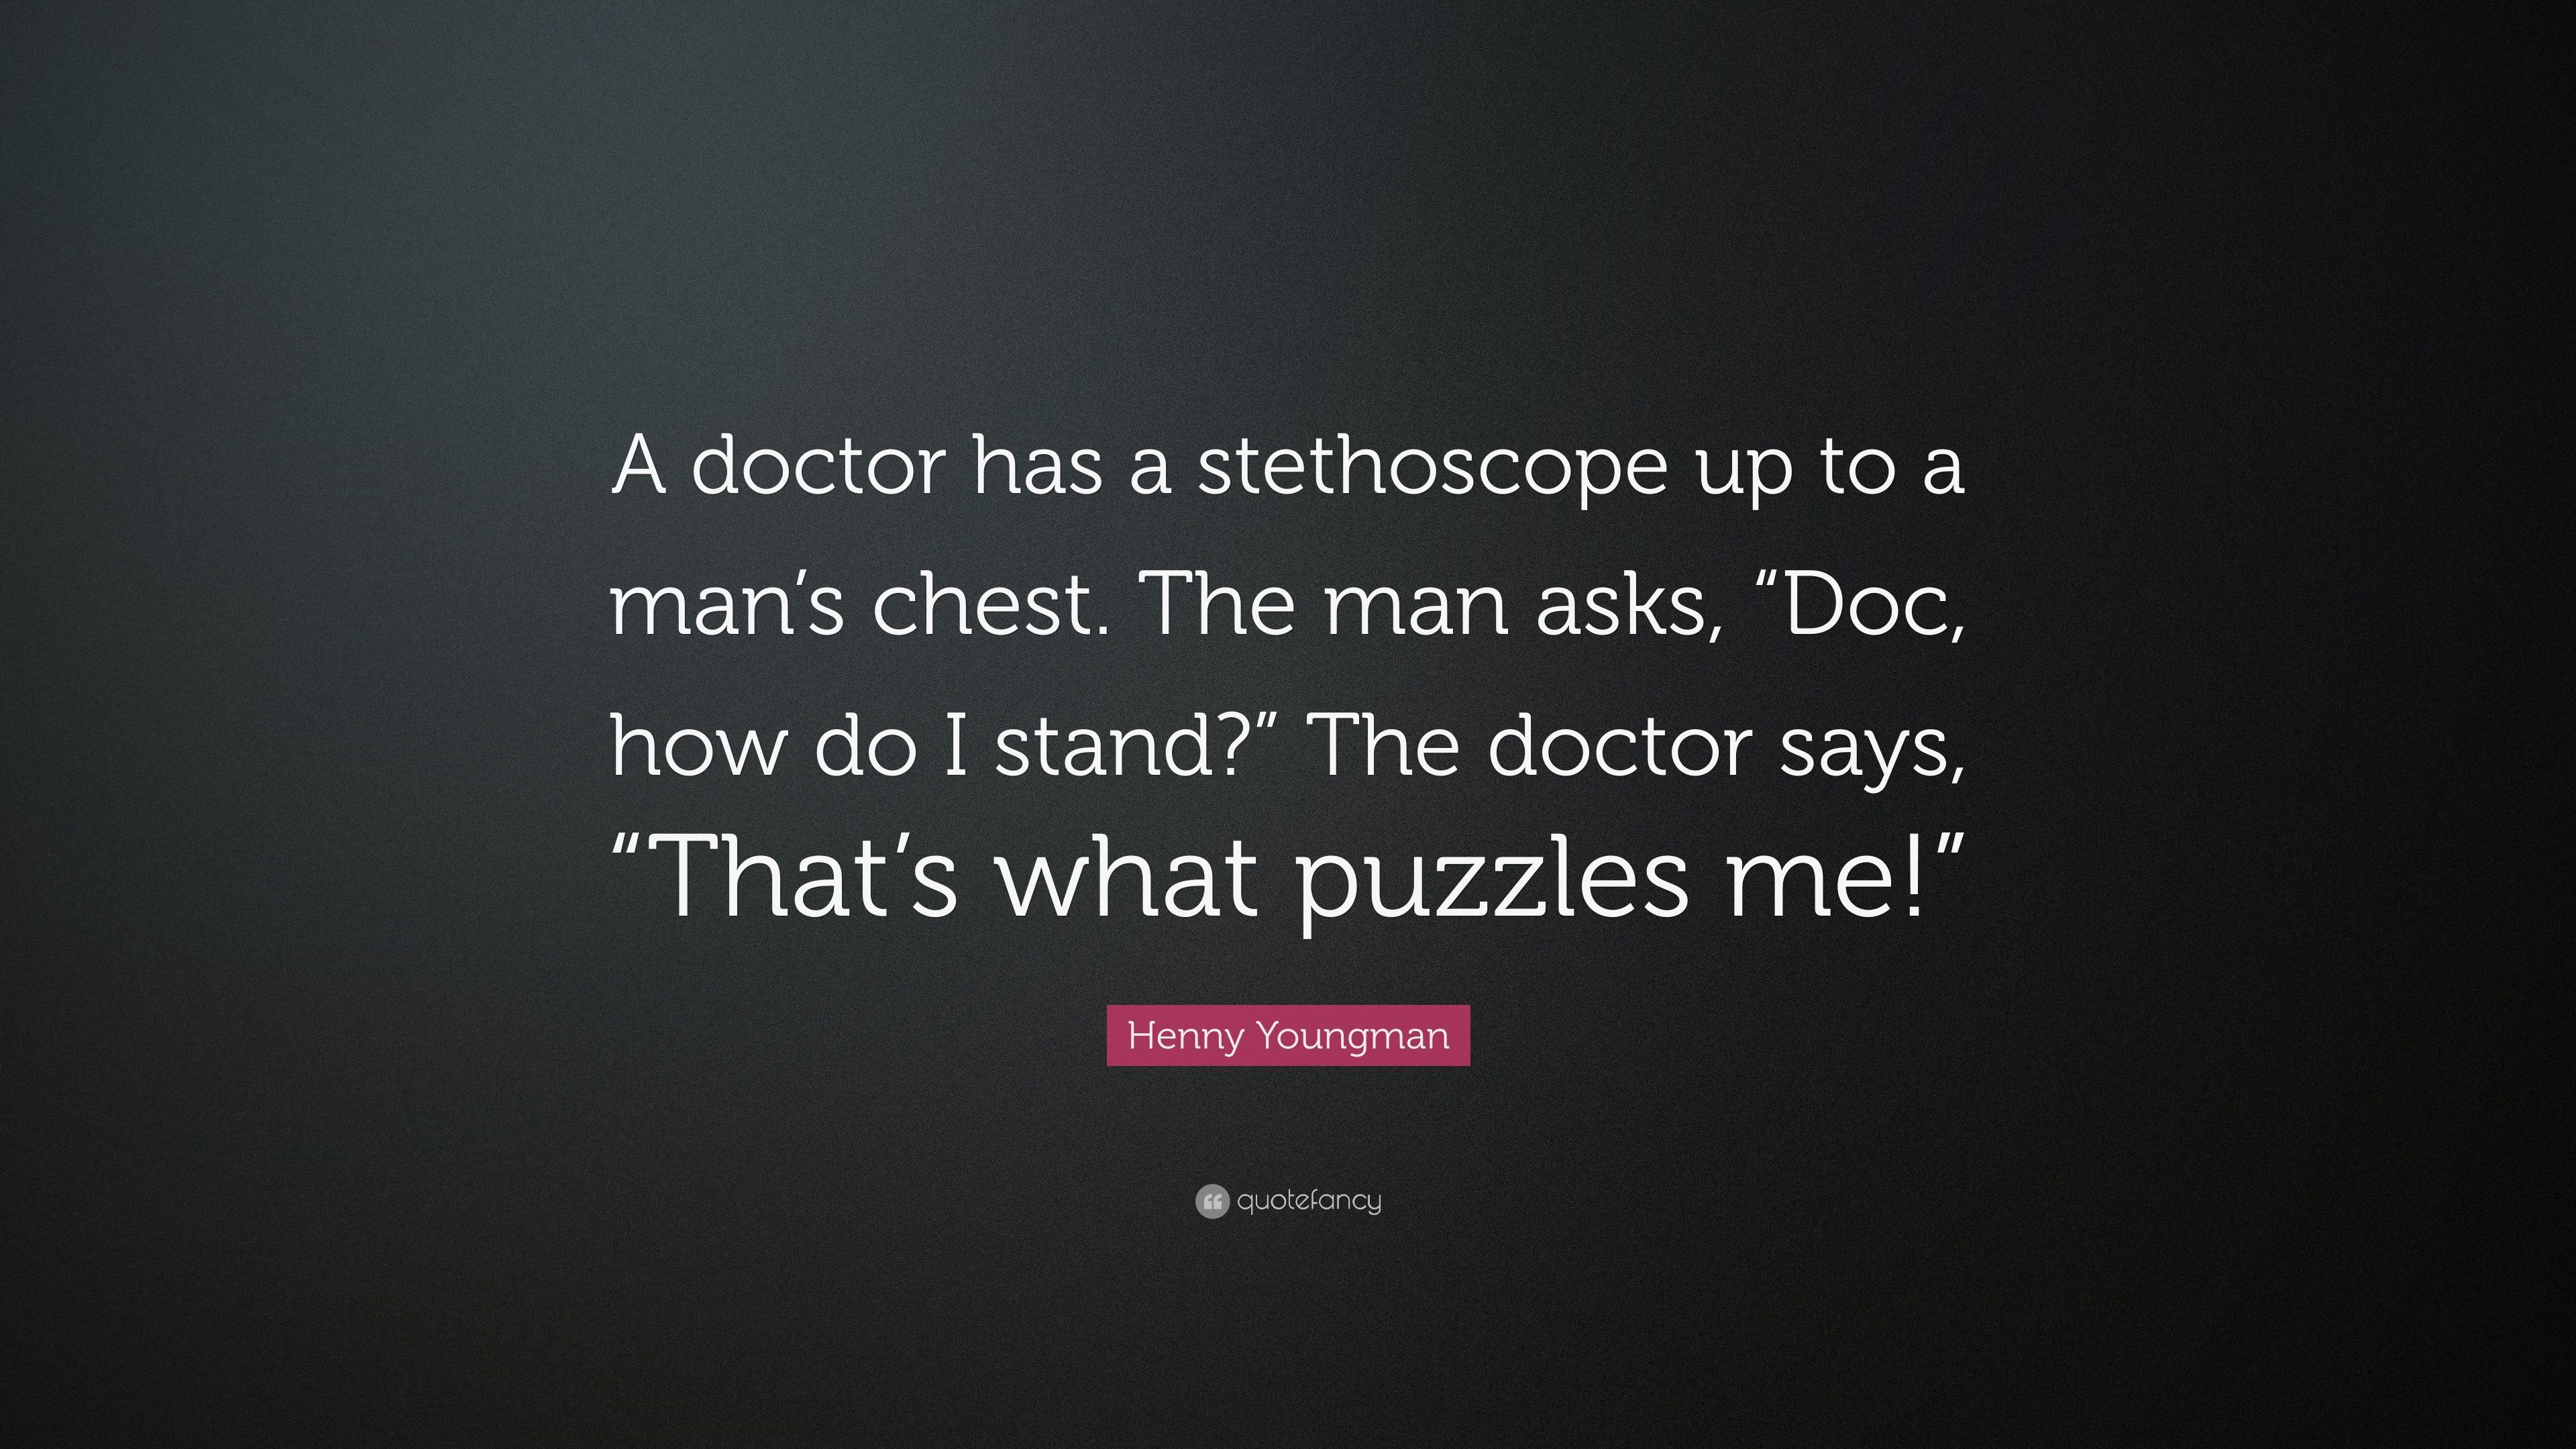 Henny Youngman Quote: “A doctor has a stethoscope up to a man's